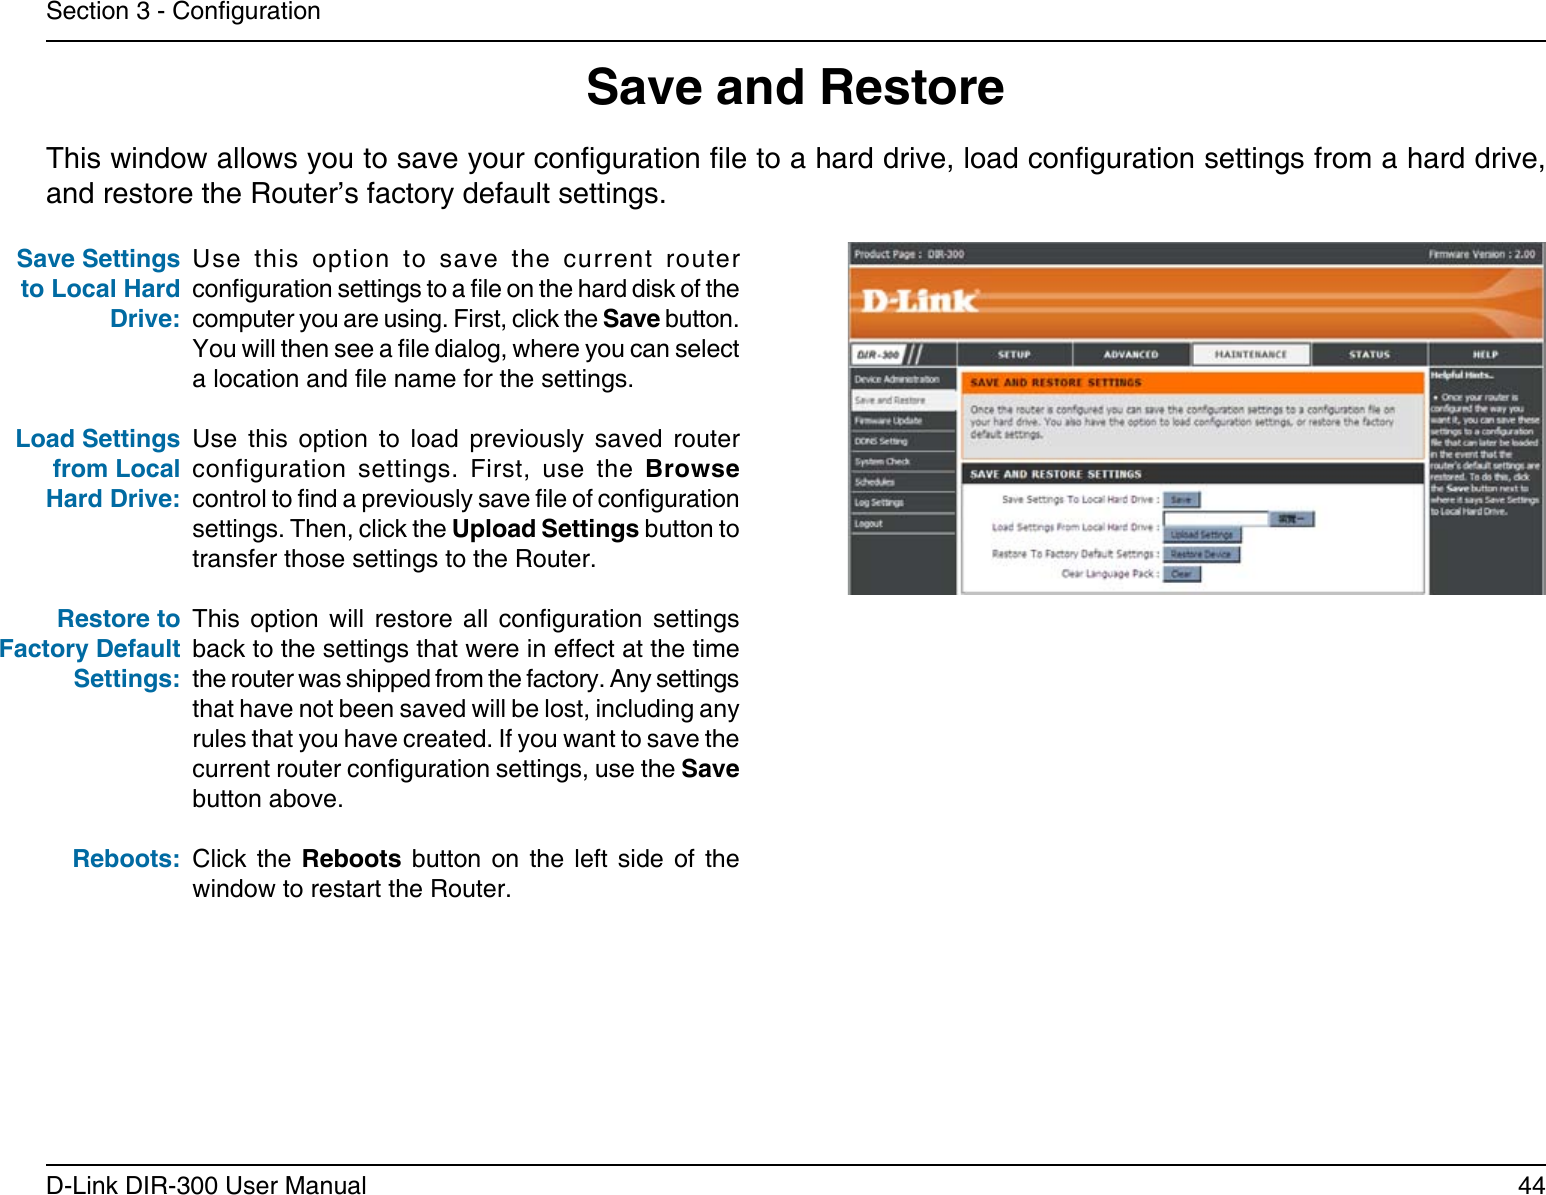 44D-Link DIR-300 User ManualSection 3 - CongurationSave and RestoreUse  this  option  to  save  the  current  router conguration settings to a le on the hard disk of the computer you are using. First, click the Save button. You will then see a le dialog, where you can select a location and le name for the settings. Use  this  option  to  load  previously  saved  router configuration  settings.  First,  use  the  Browse control to nd a previously save le of conguration settings. Then, click the Upload Settings button to transfer those settings to the Router. This  option  will  restore  all  conguration  settings back to the settings that were in effect at the time the router was shipped from the factory. Any settings that have not been saved will be lost, including any rules that you have created. If you want to save the current router conguration settings, use the Save button above. Click  the  Reboots  button  on  the  left  side  of  the window to restart the Router.Save Settings to Local Hard Drive:Load Settings from Local Hard Drive:Restore to Factory Default Settings:Reboots:This window allows you to save your conguration le to a hard drive, load conguration settings from a hard drive, and restore the Router’s factory default settings.